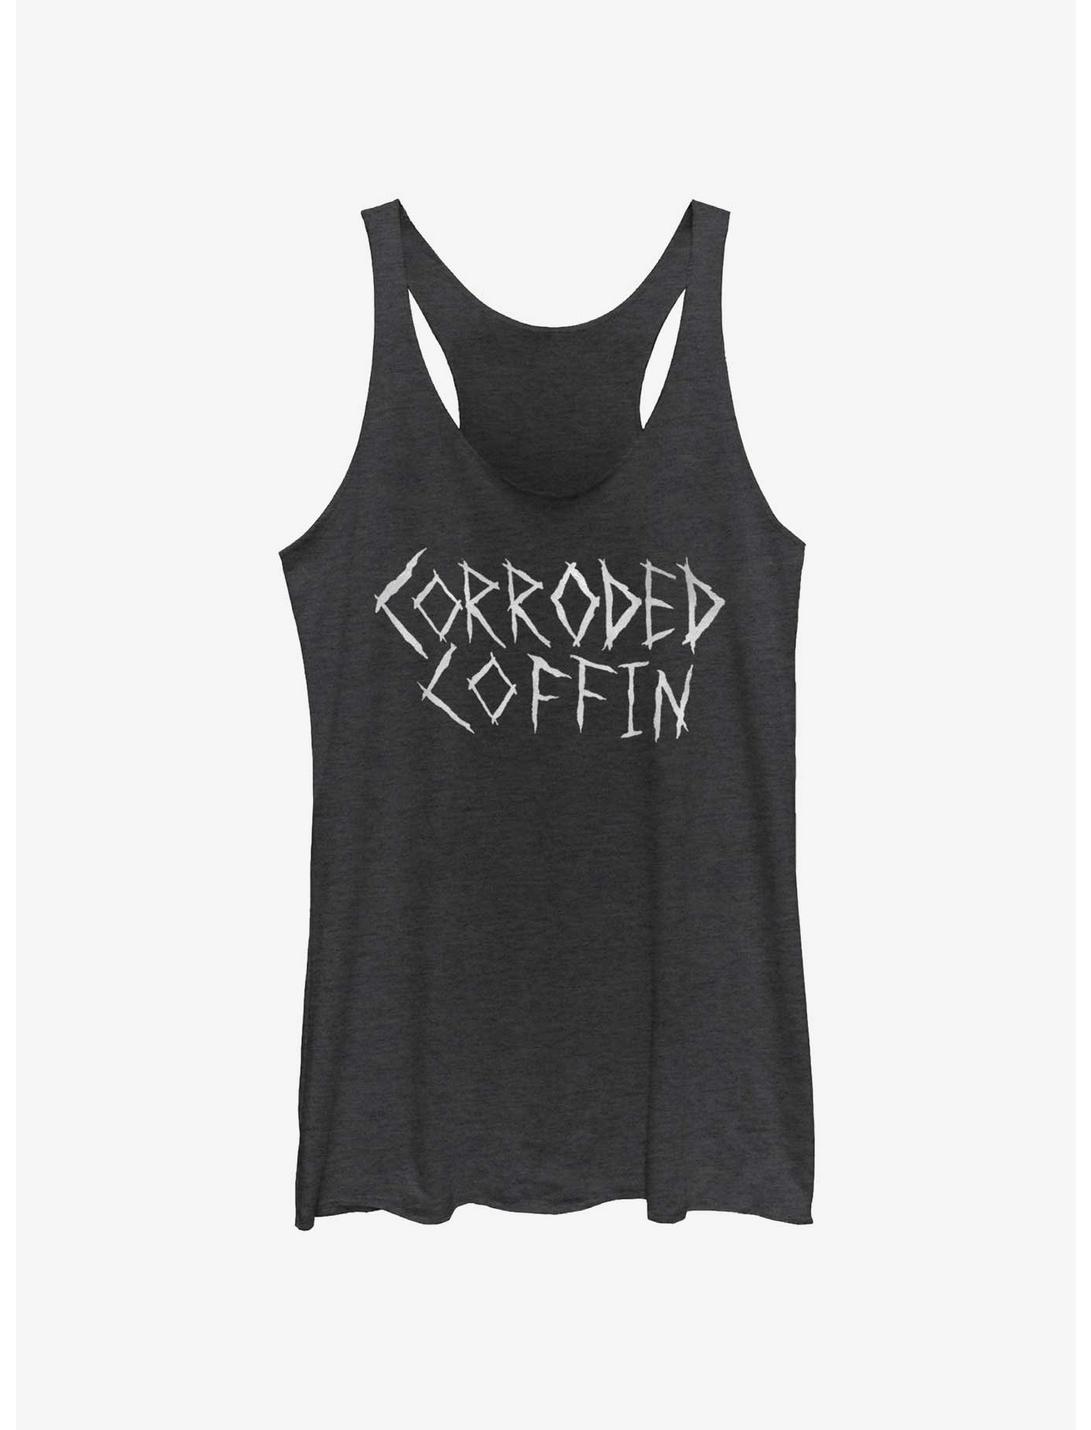 Stranger Things Corroded Coffin Girls Tank Top, BLK HTR, hi-res